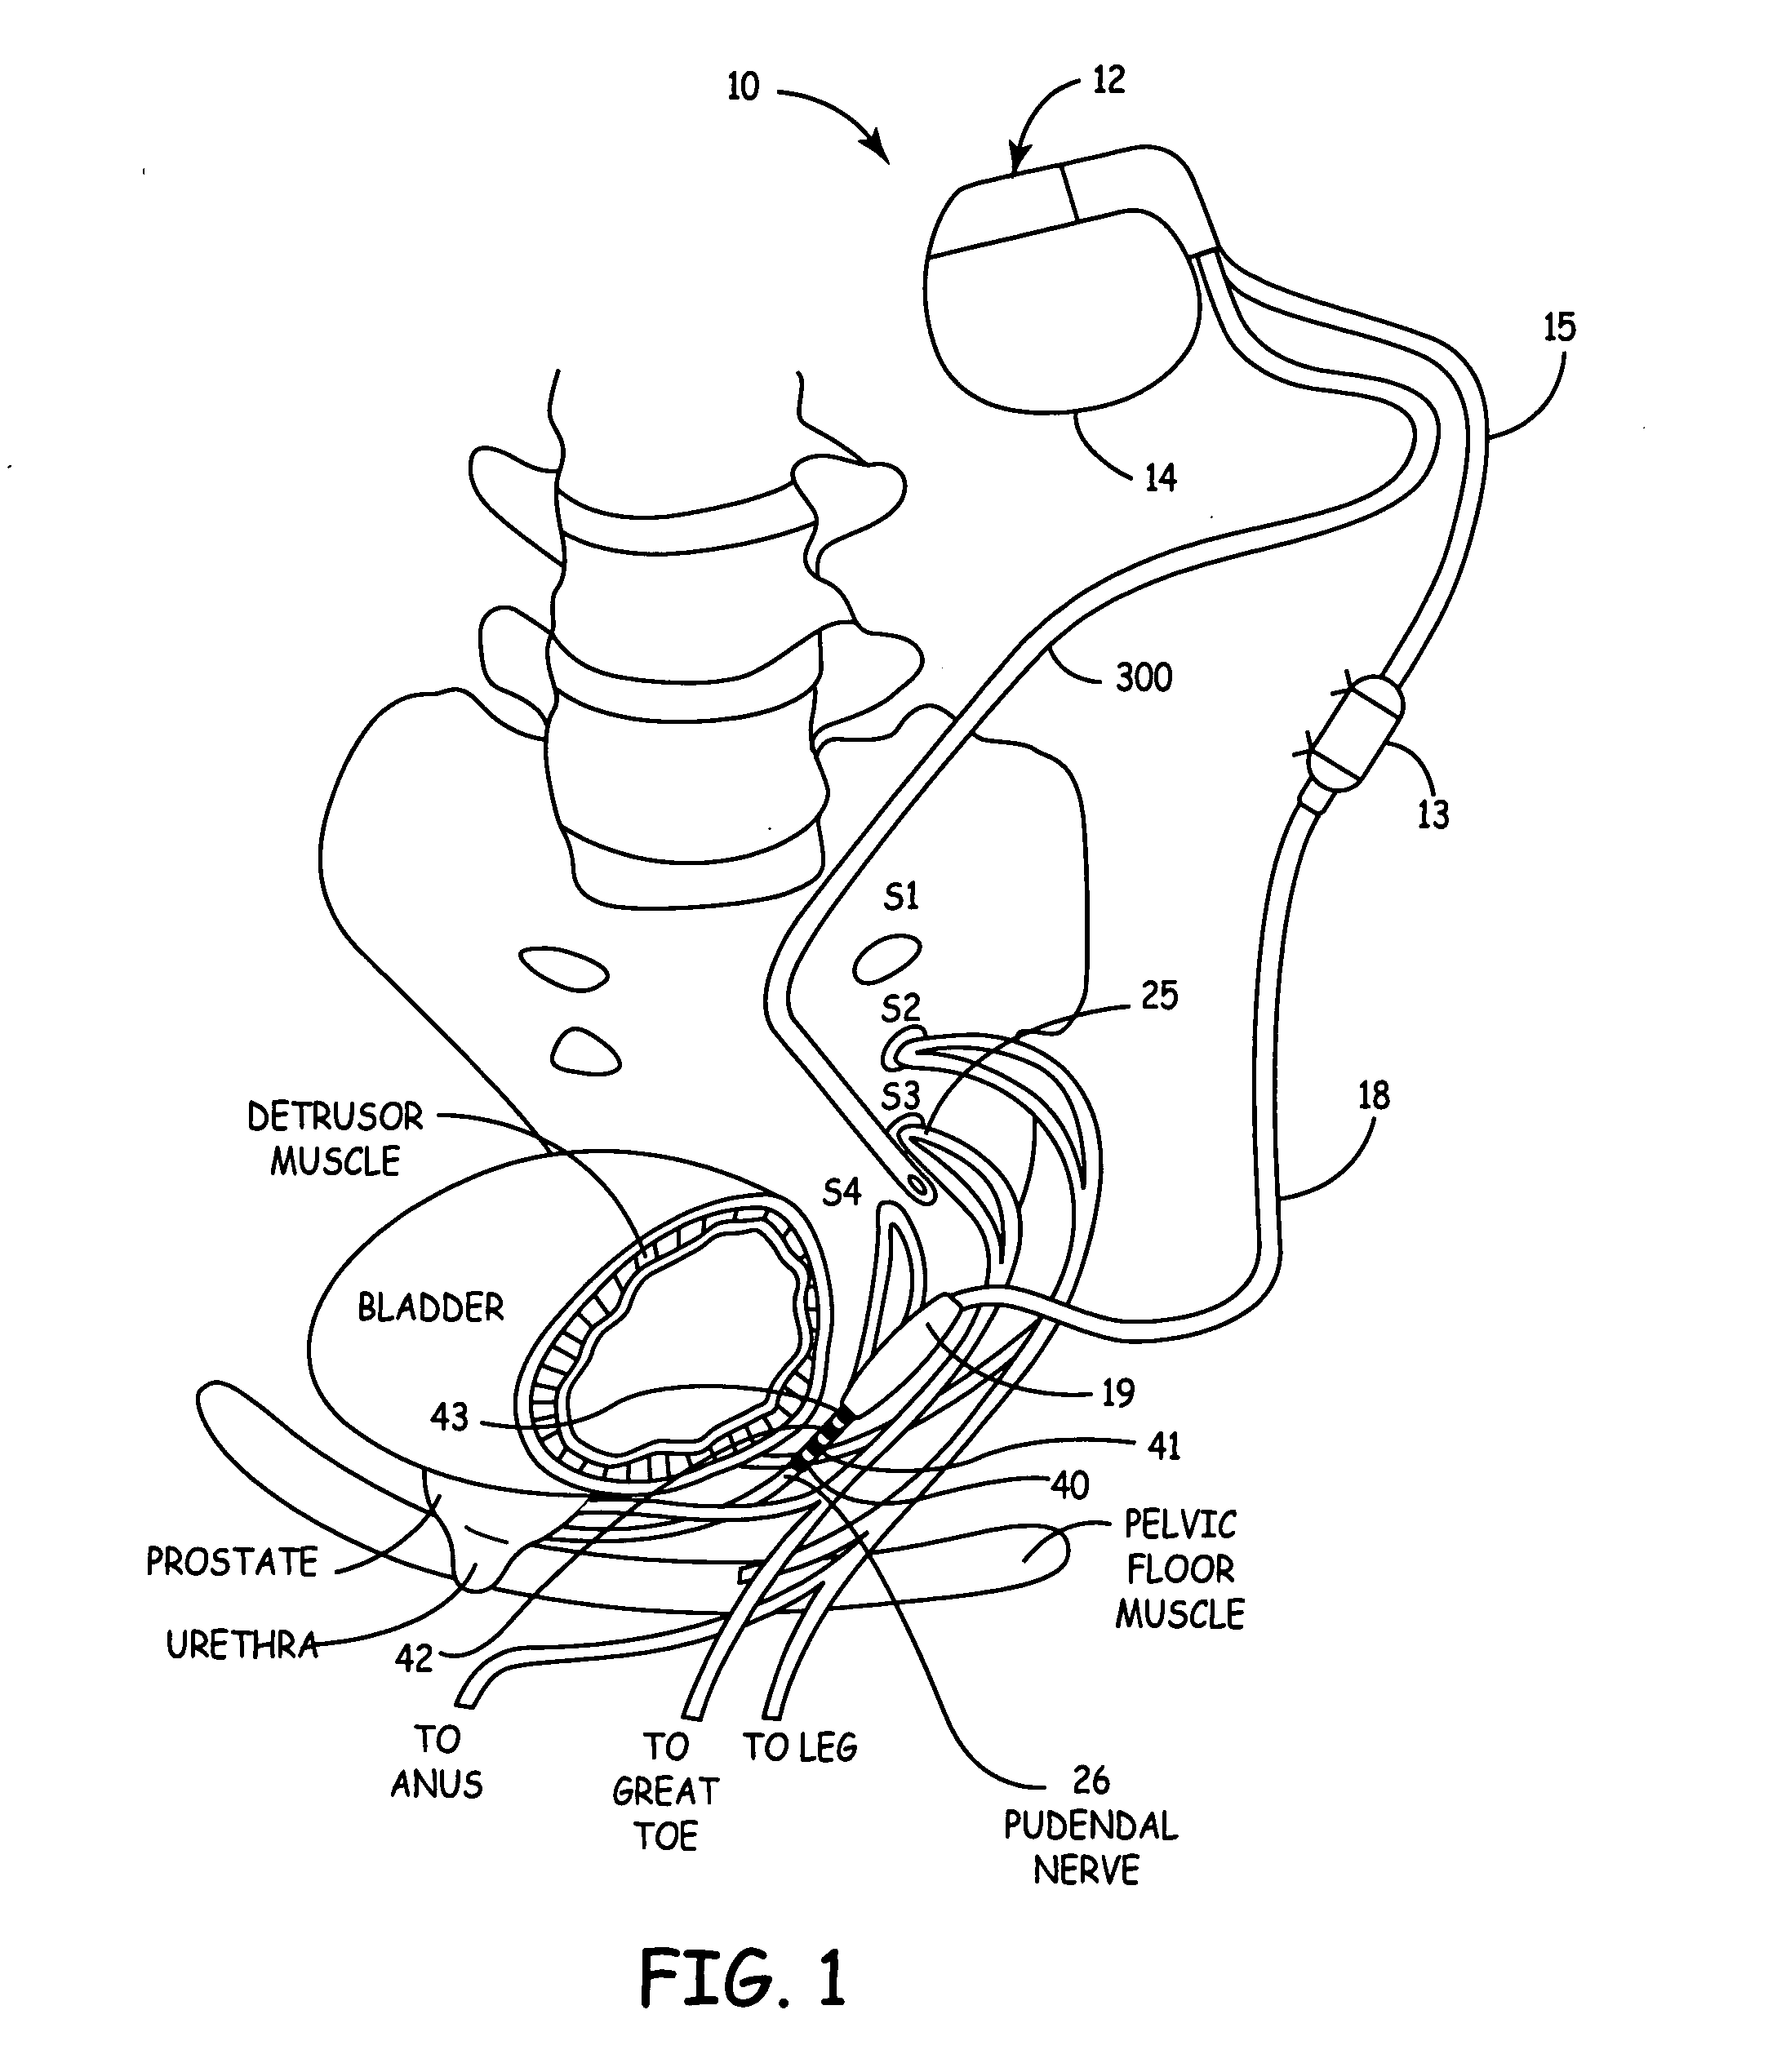 Method, system and device for treating disorders of the pelvic floor by delivering drugs to the pudendal nerves